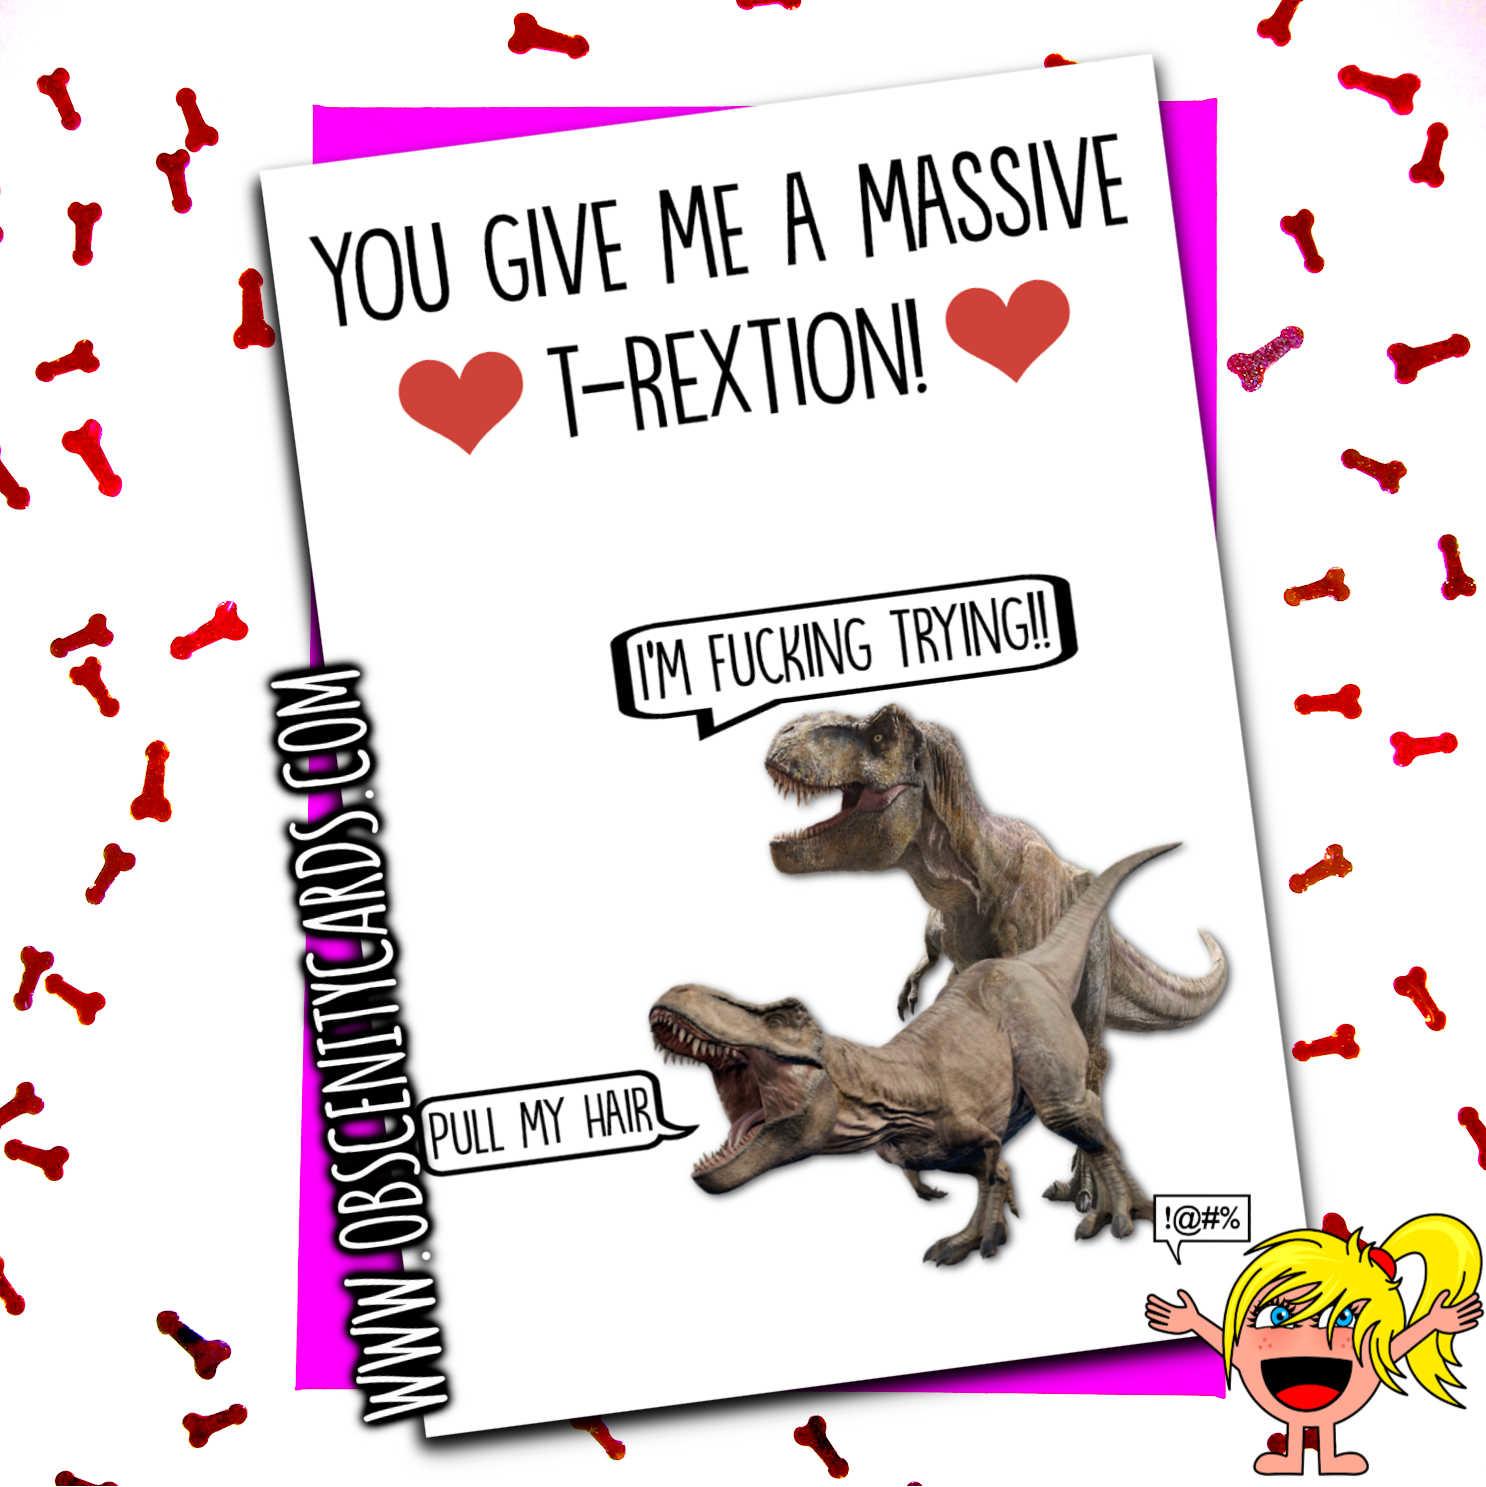 YOU GIVE ME A MASSIVE T-REXCTION DINOSAUR T-REX FUNNY VALENTINES ANNIVERSARY CARD